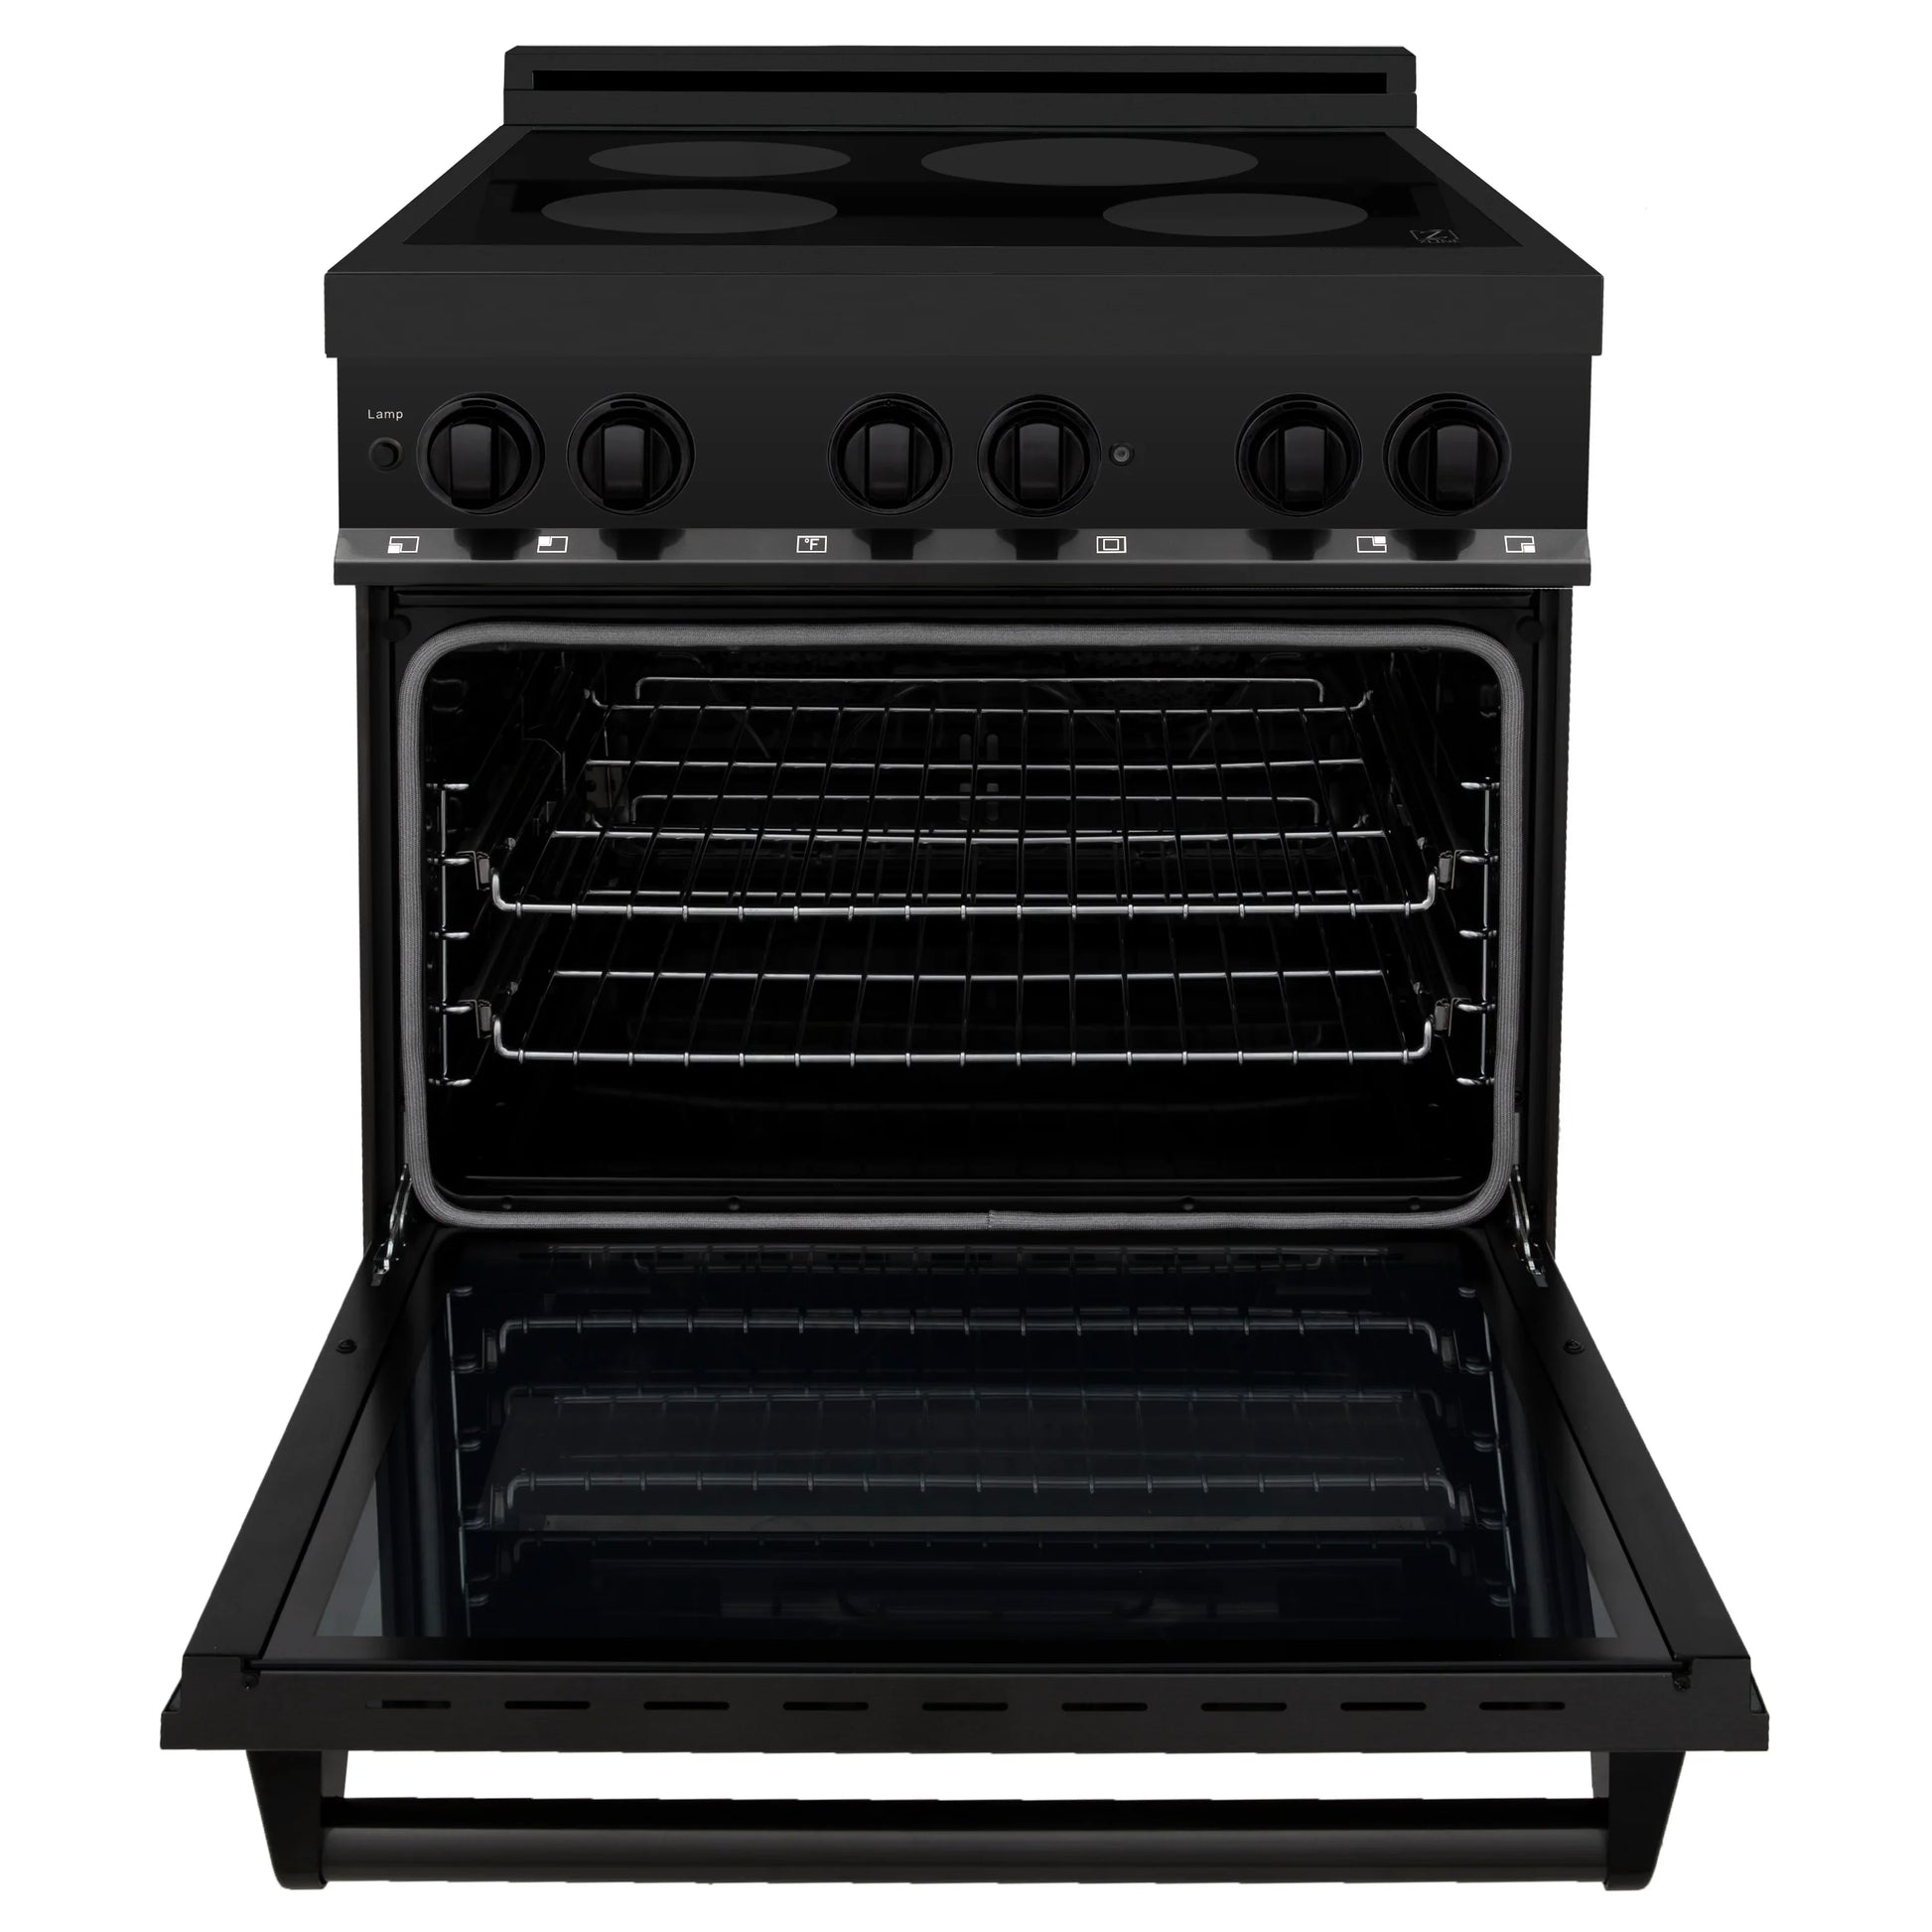 ZLINE 30" 4-Element Stove Induction Range with Electric Oven - Black Stainless Steel